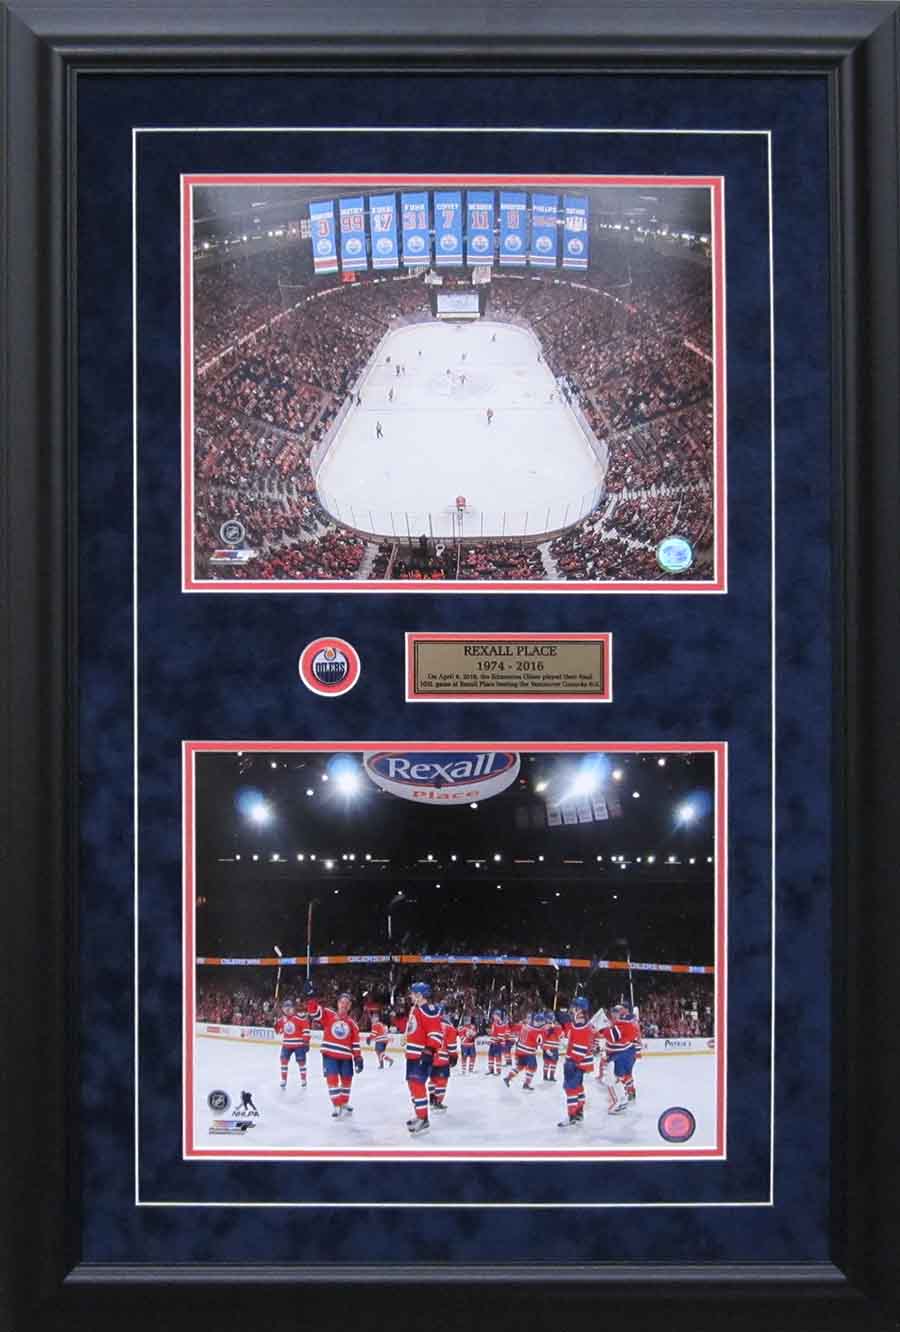 Last Game at Rexall Place - Framed photos